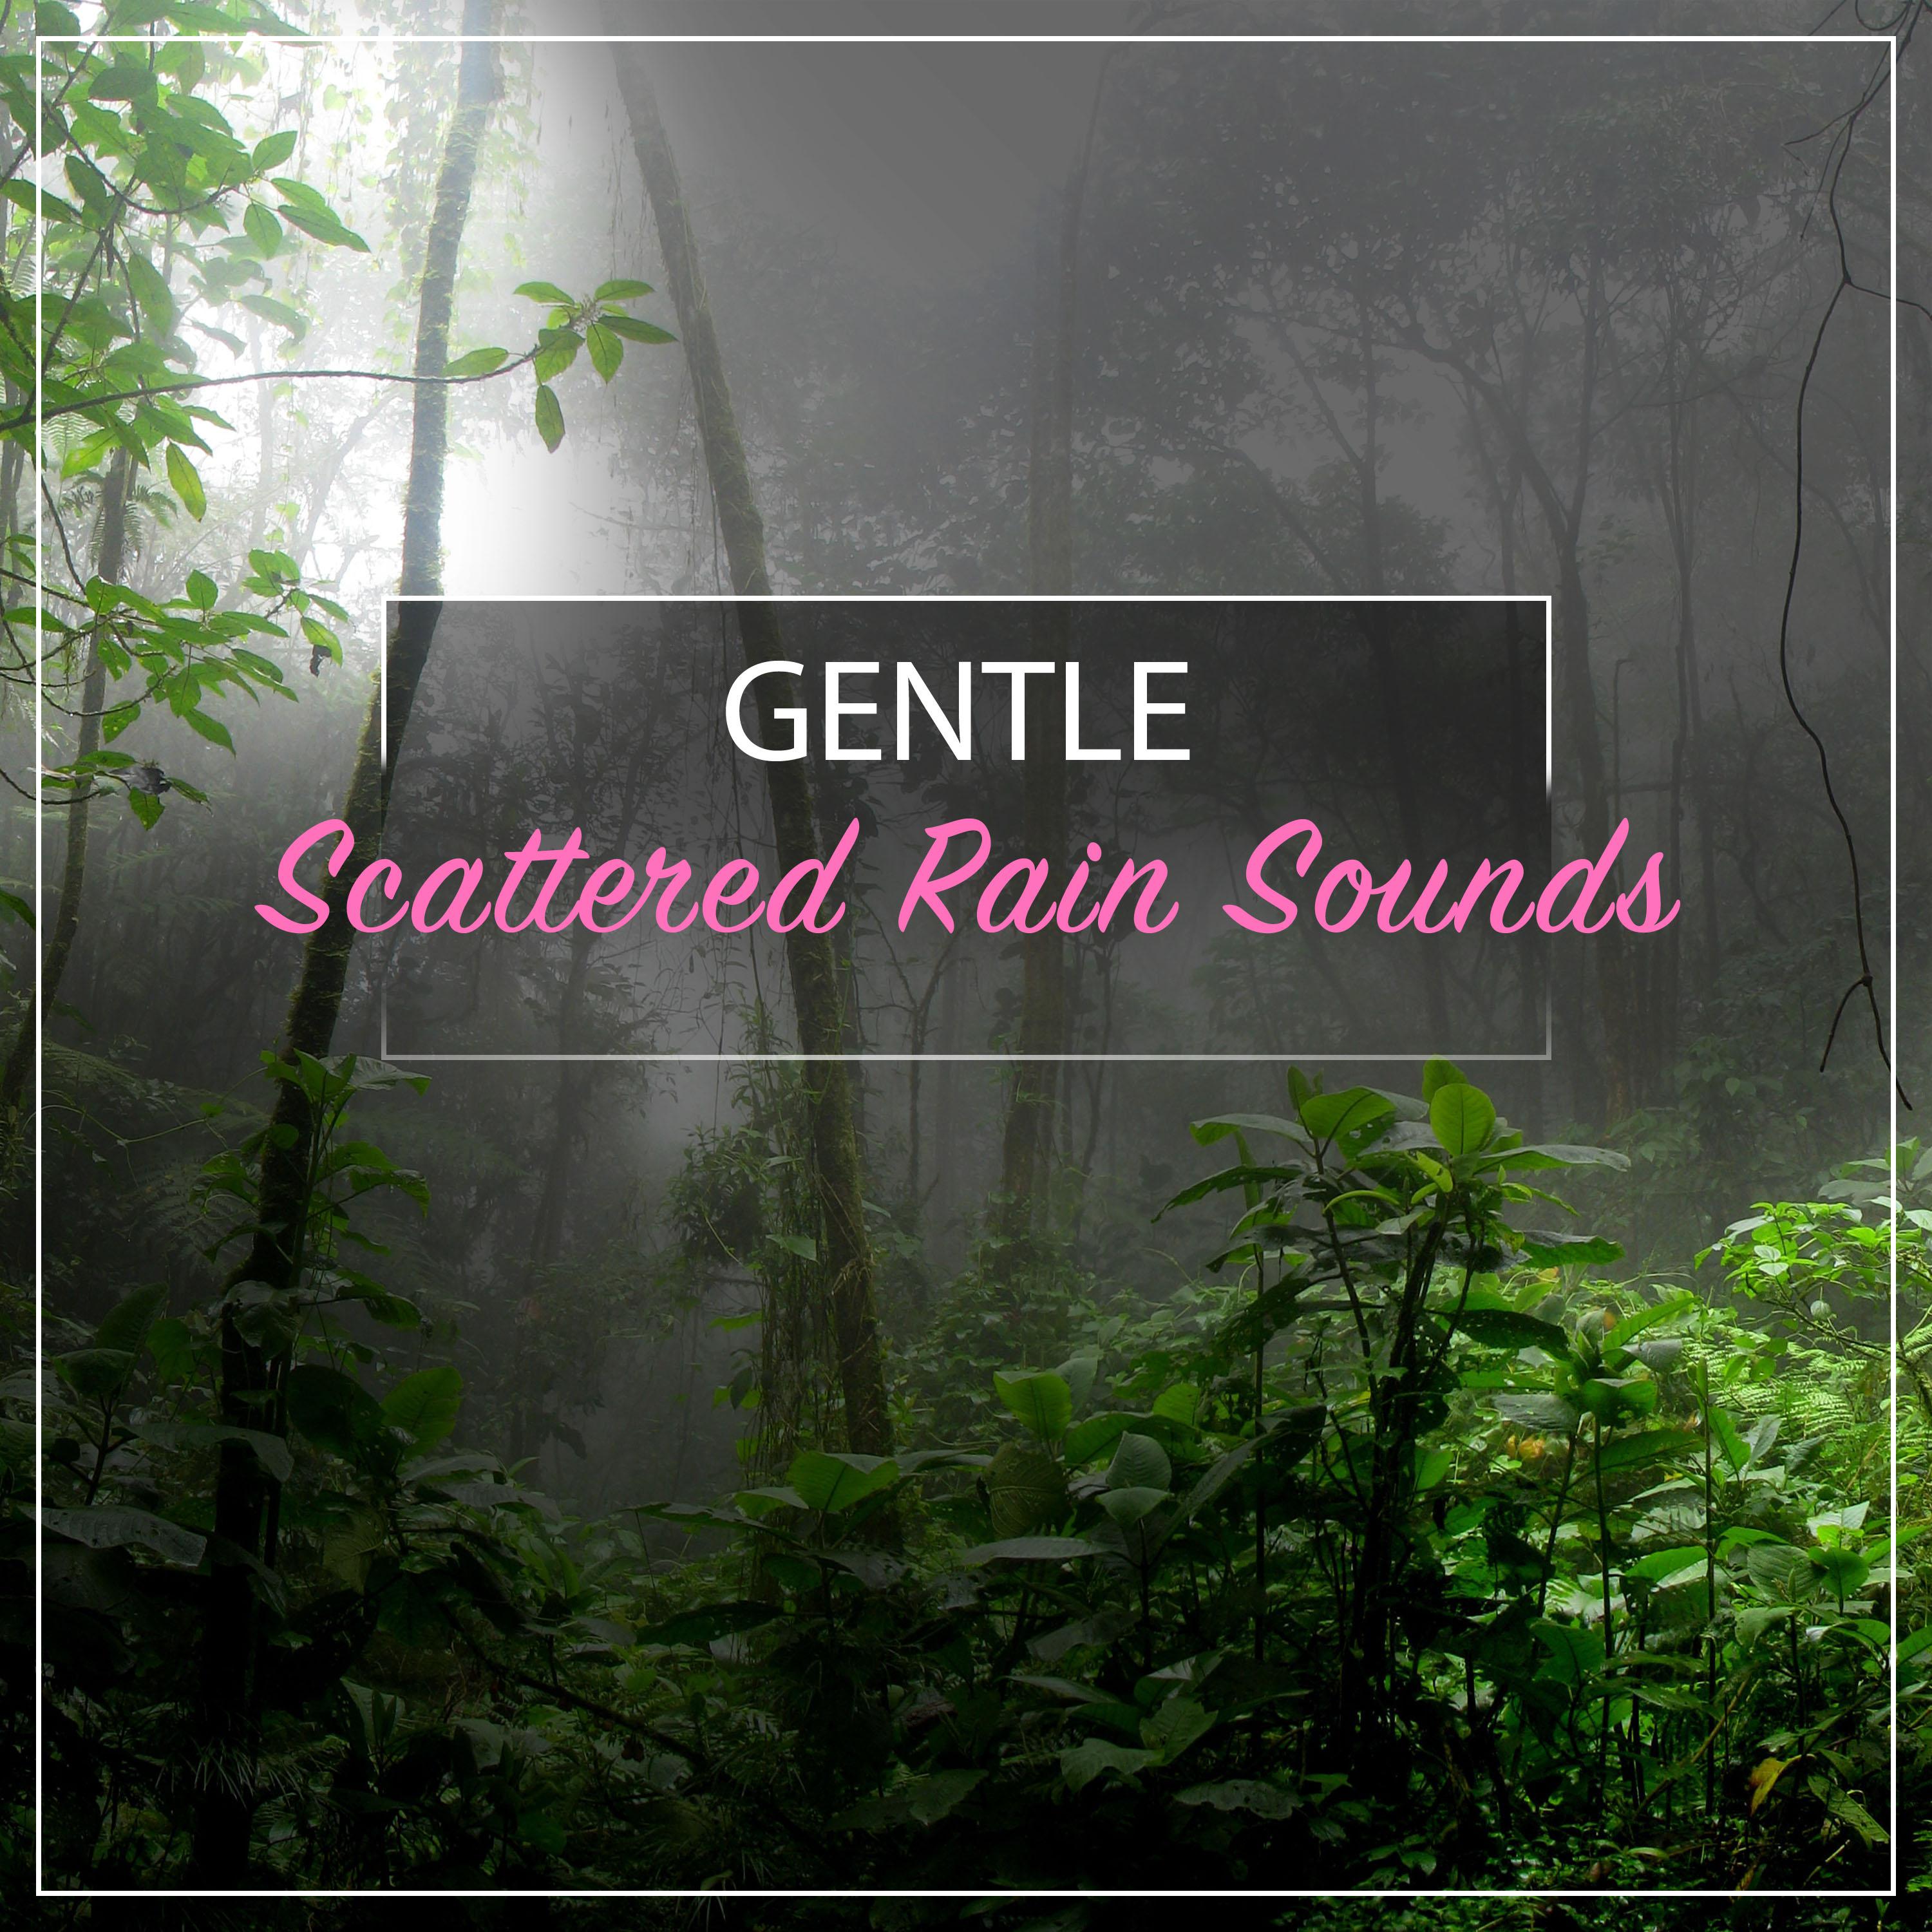 #21 Gentle Scattered Rain Sounds